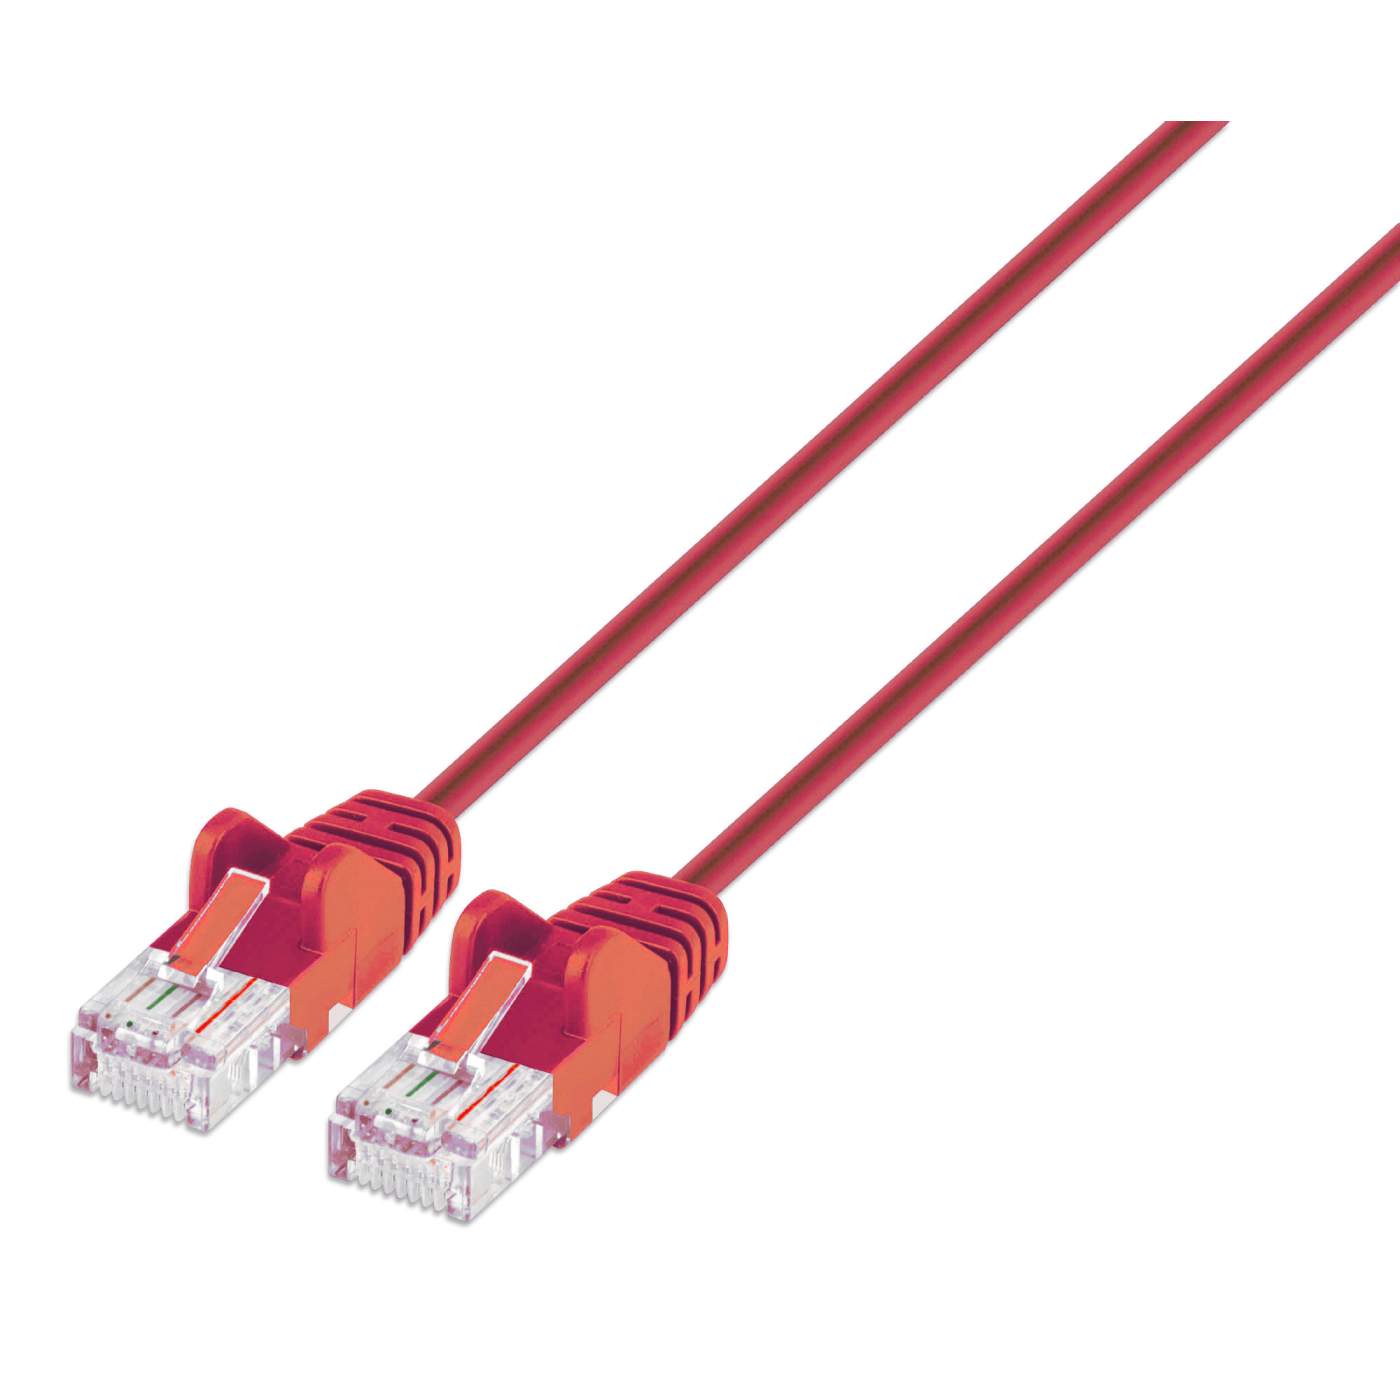 Cable de Red Categoría 6, Cable Ethernet Cat6